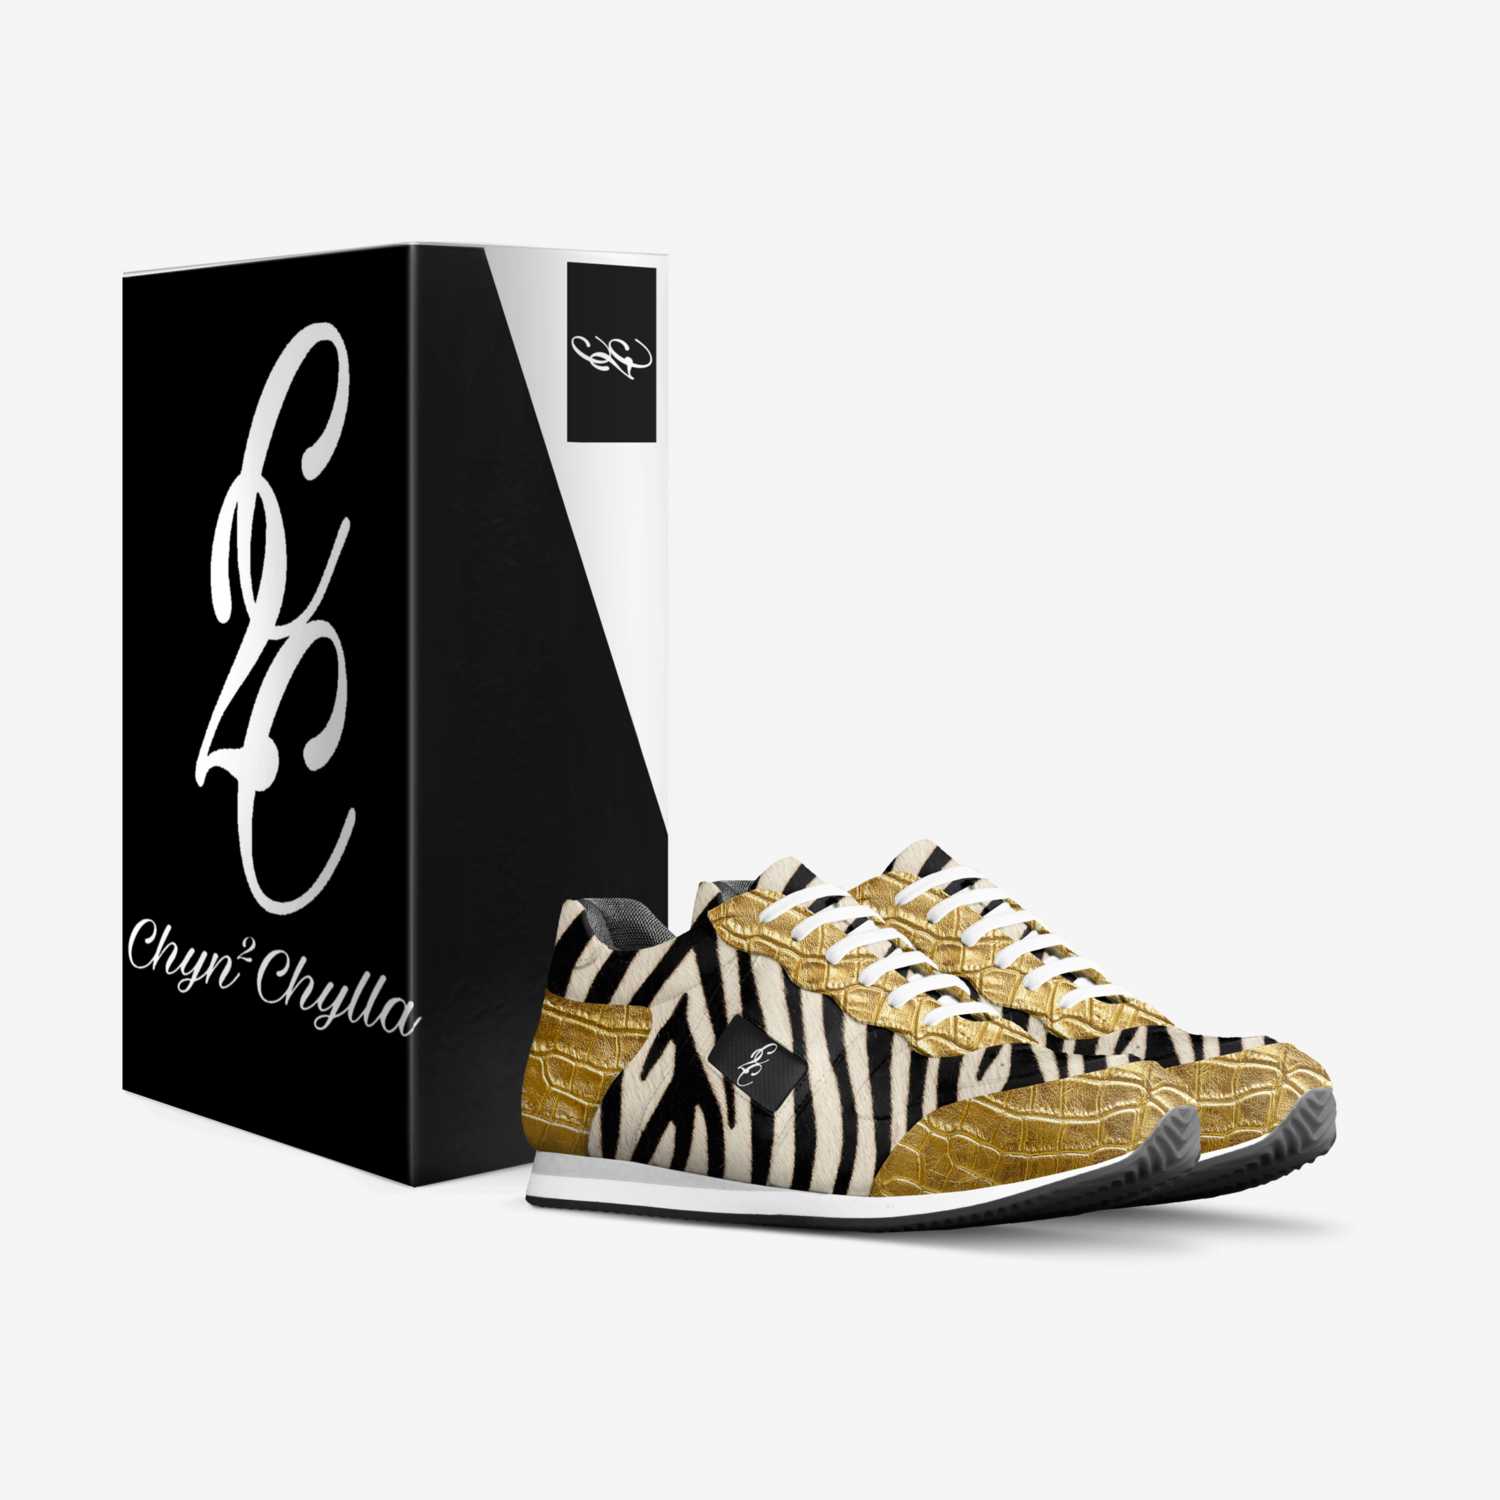 CHYLL CLAZZIX 2.0 custom made in Italy shoes by Chyn² Chylla | Box view